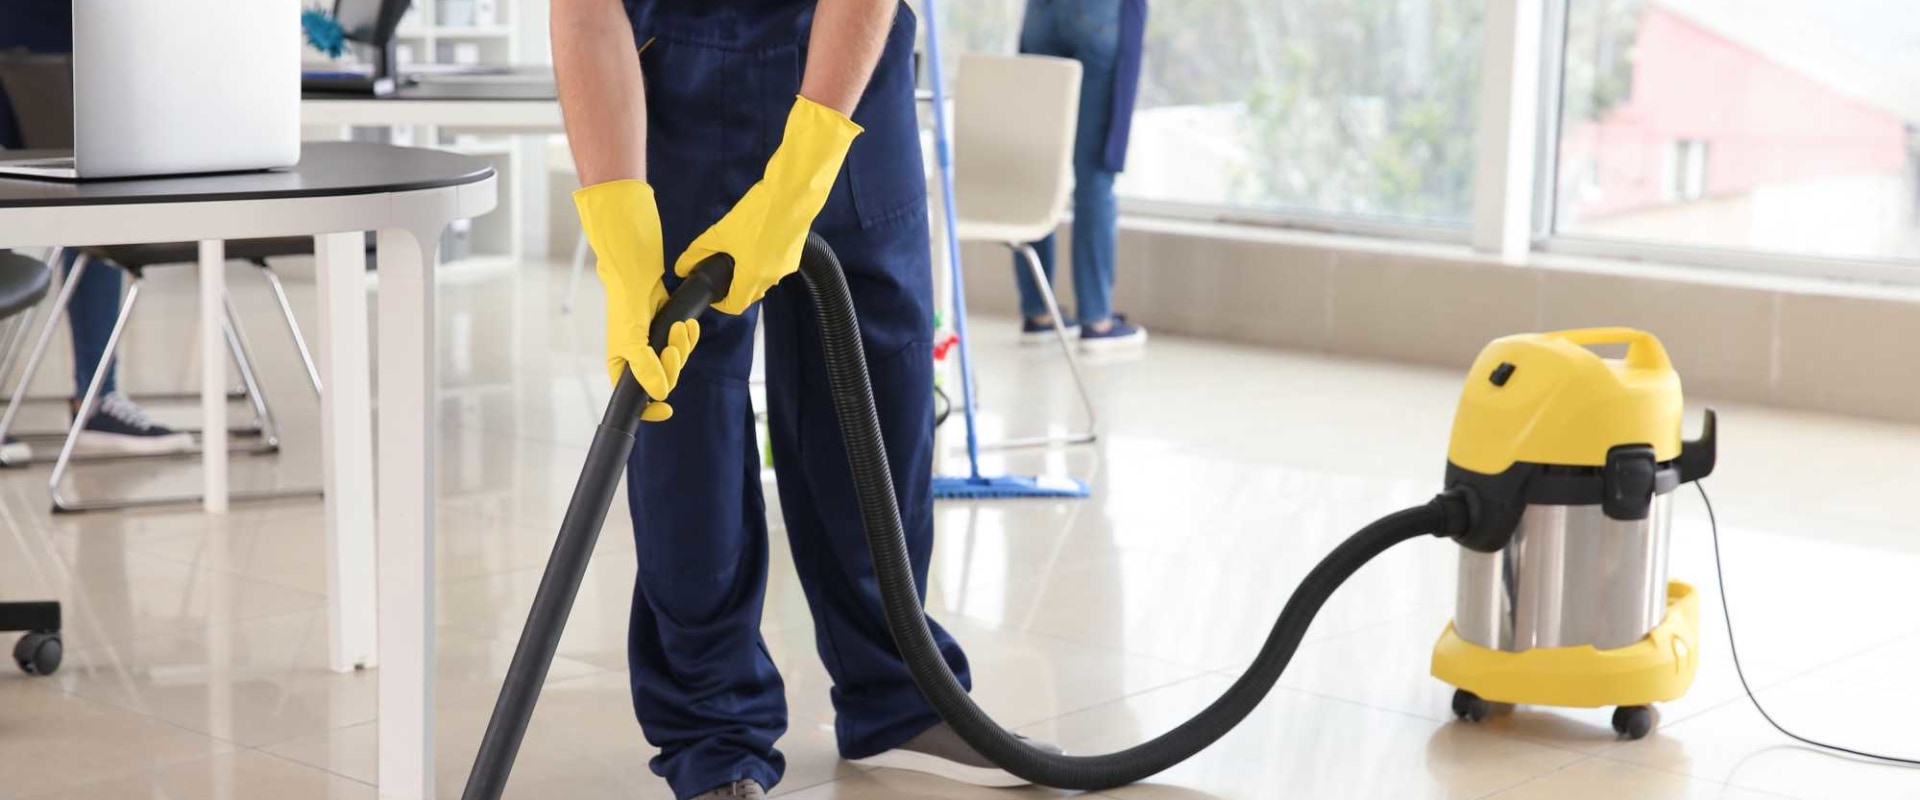 What are commercial cleaners?